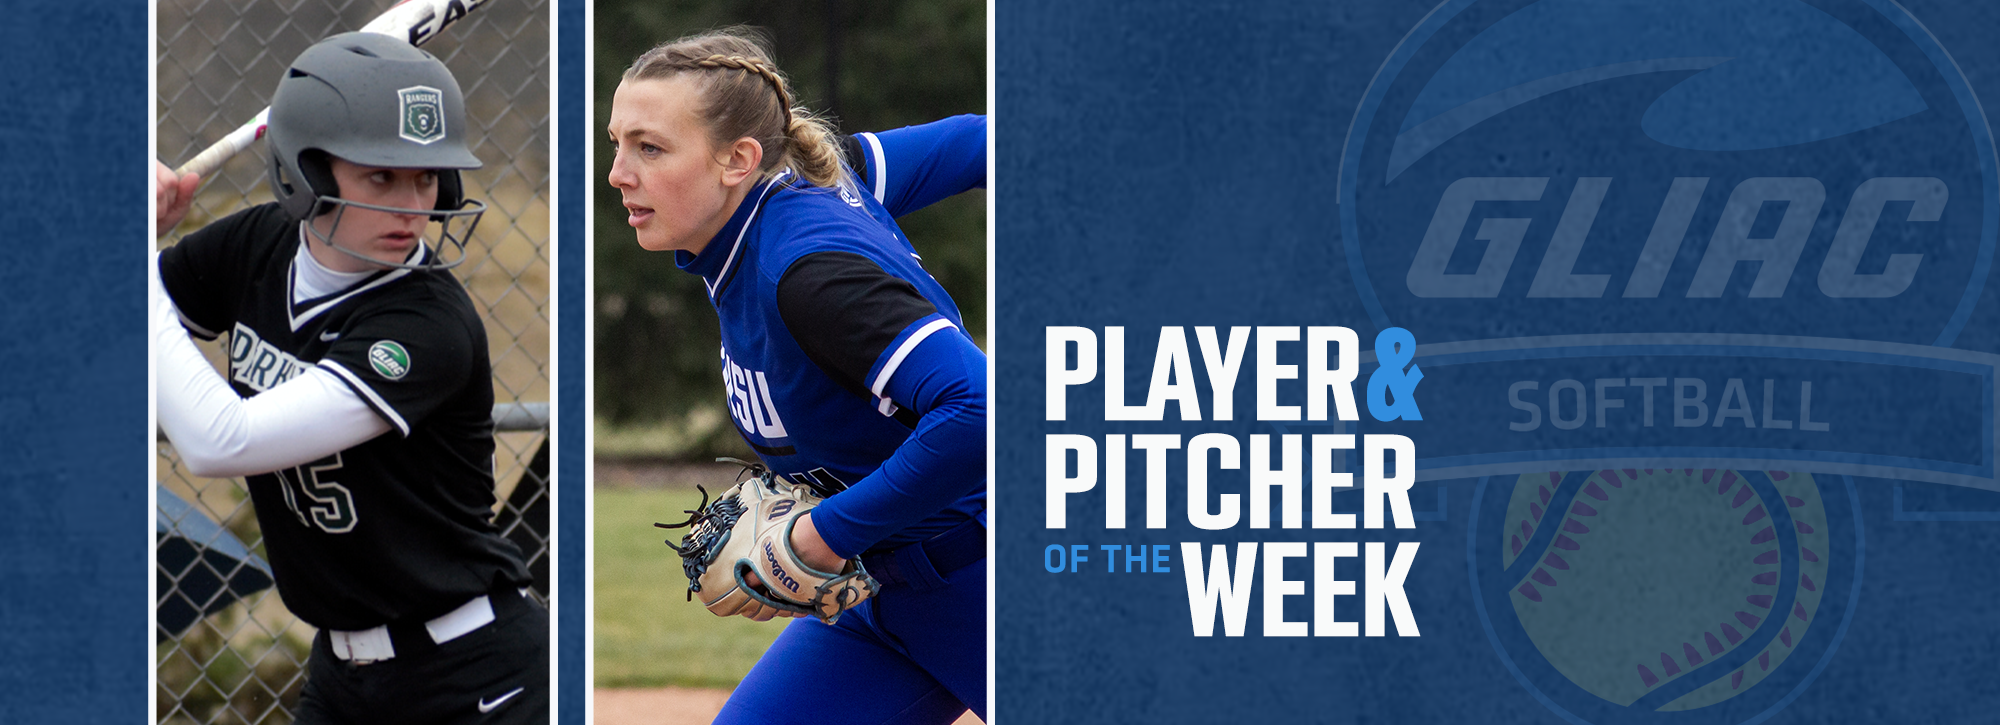 Parkside's Remington and GVSU's Beatus earn GLIAC weekly softball recognition